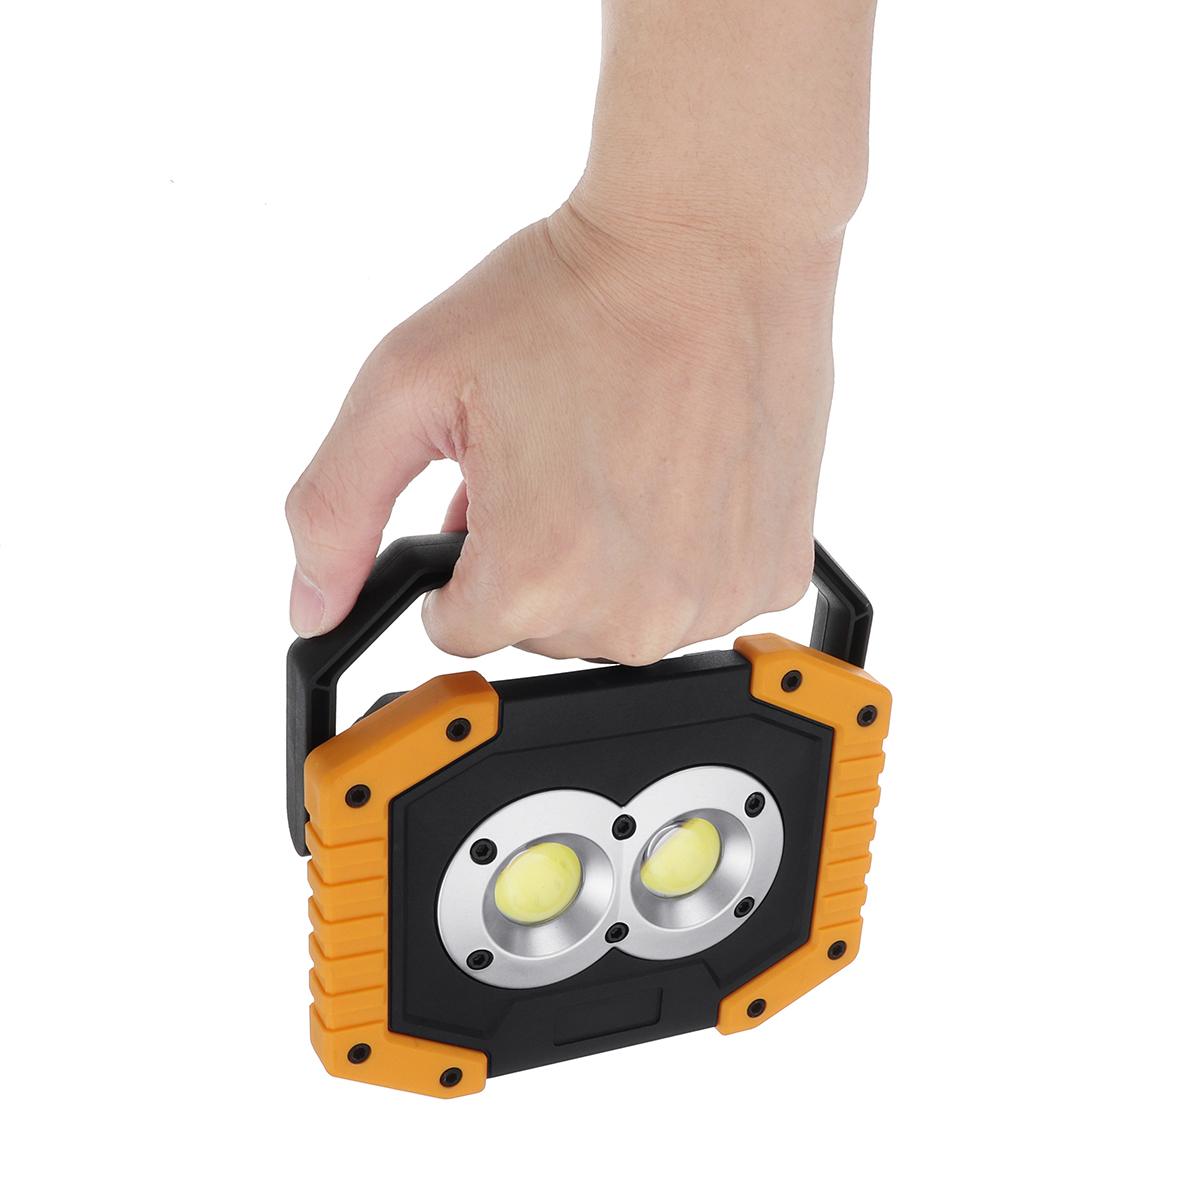 30W COB LED Rechargeable Work Light Emergency Lamp Hand Torch Camping Tent Lantern USB Charging Portable Power Bank Searchlight